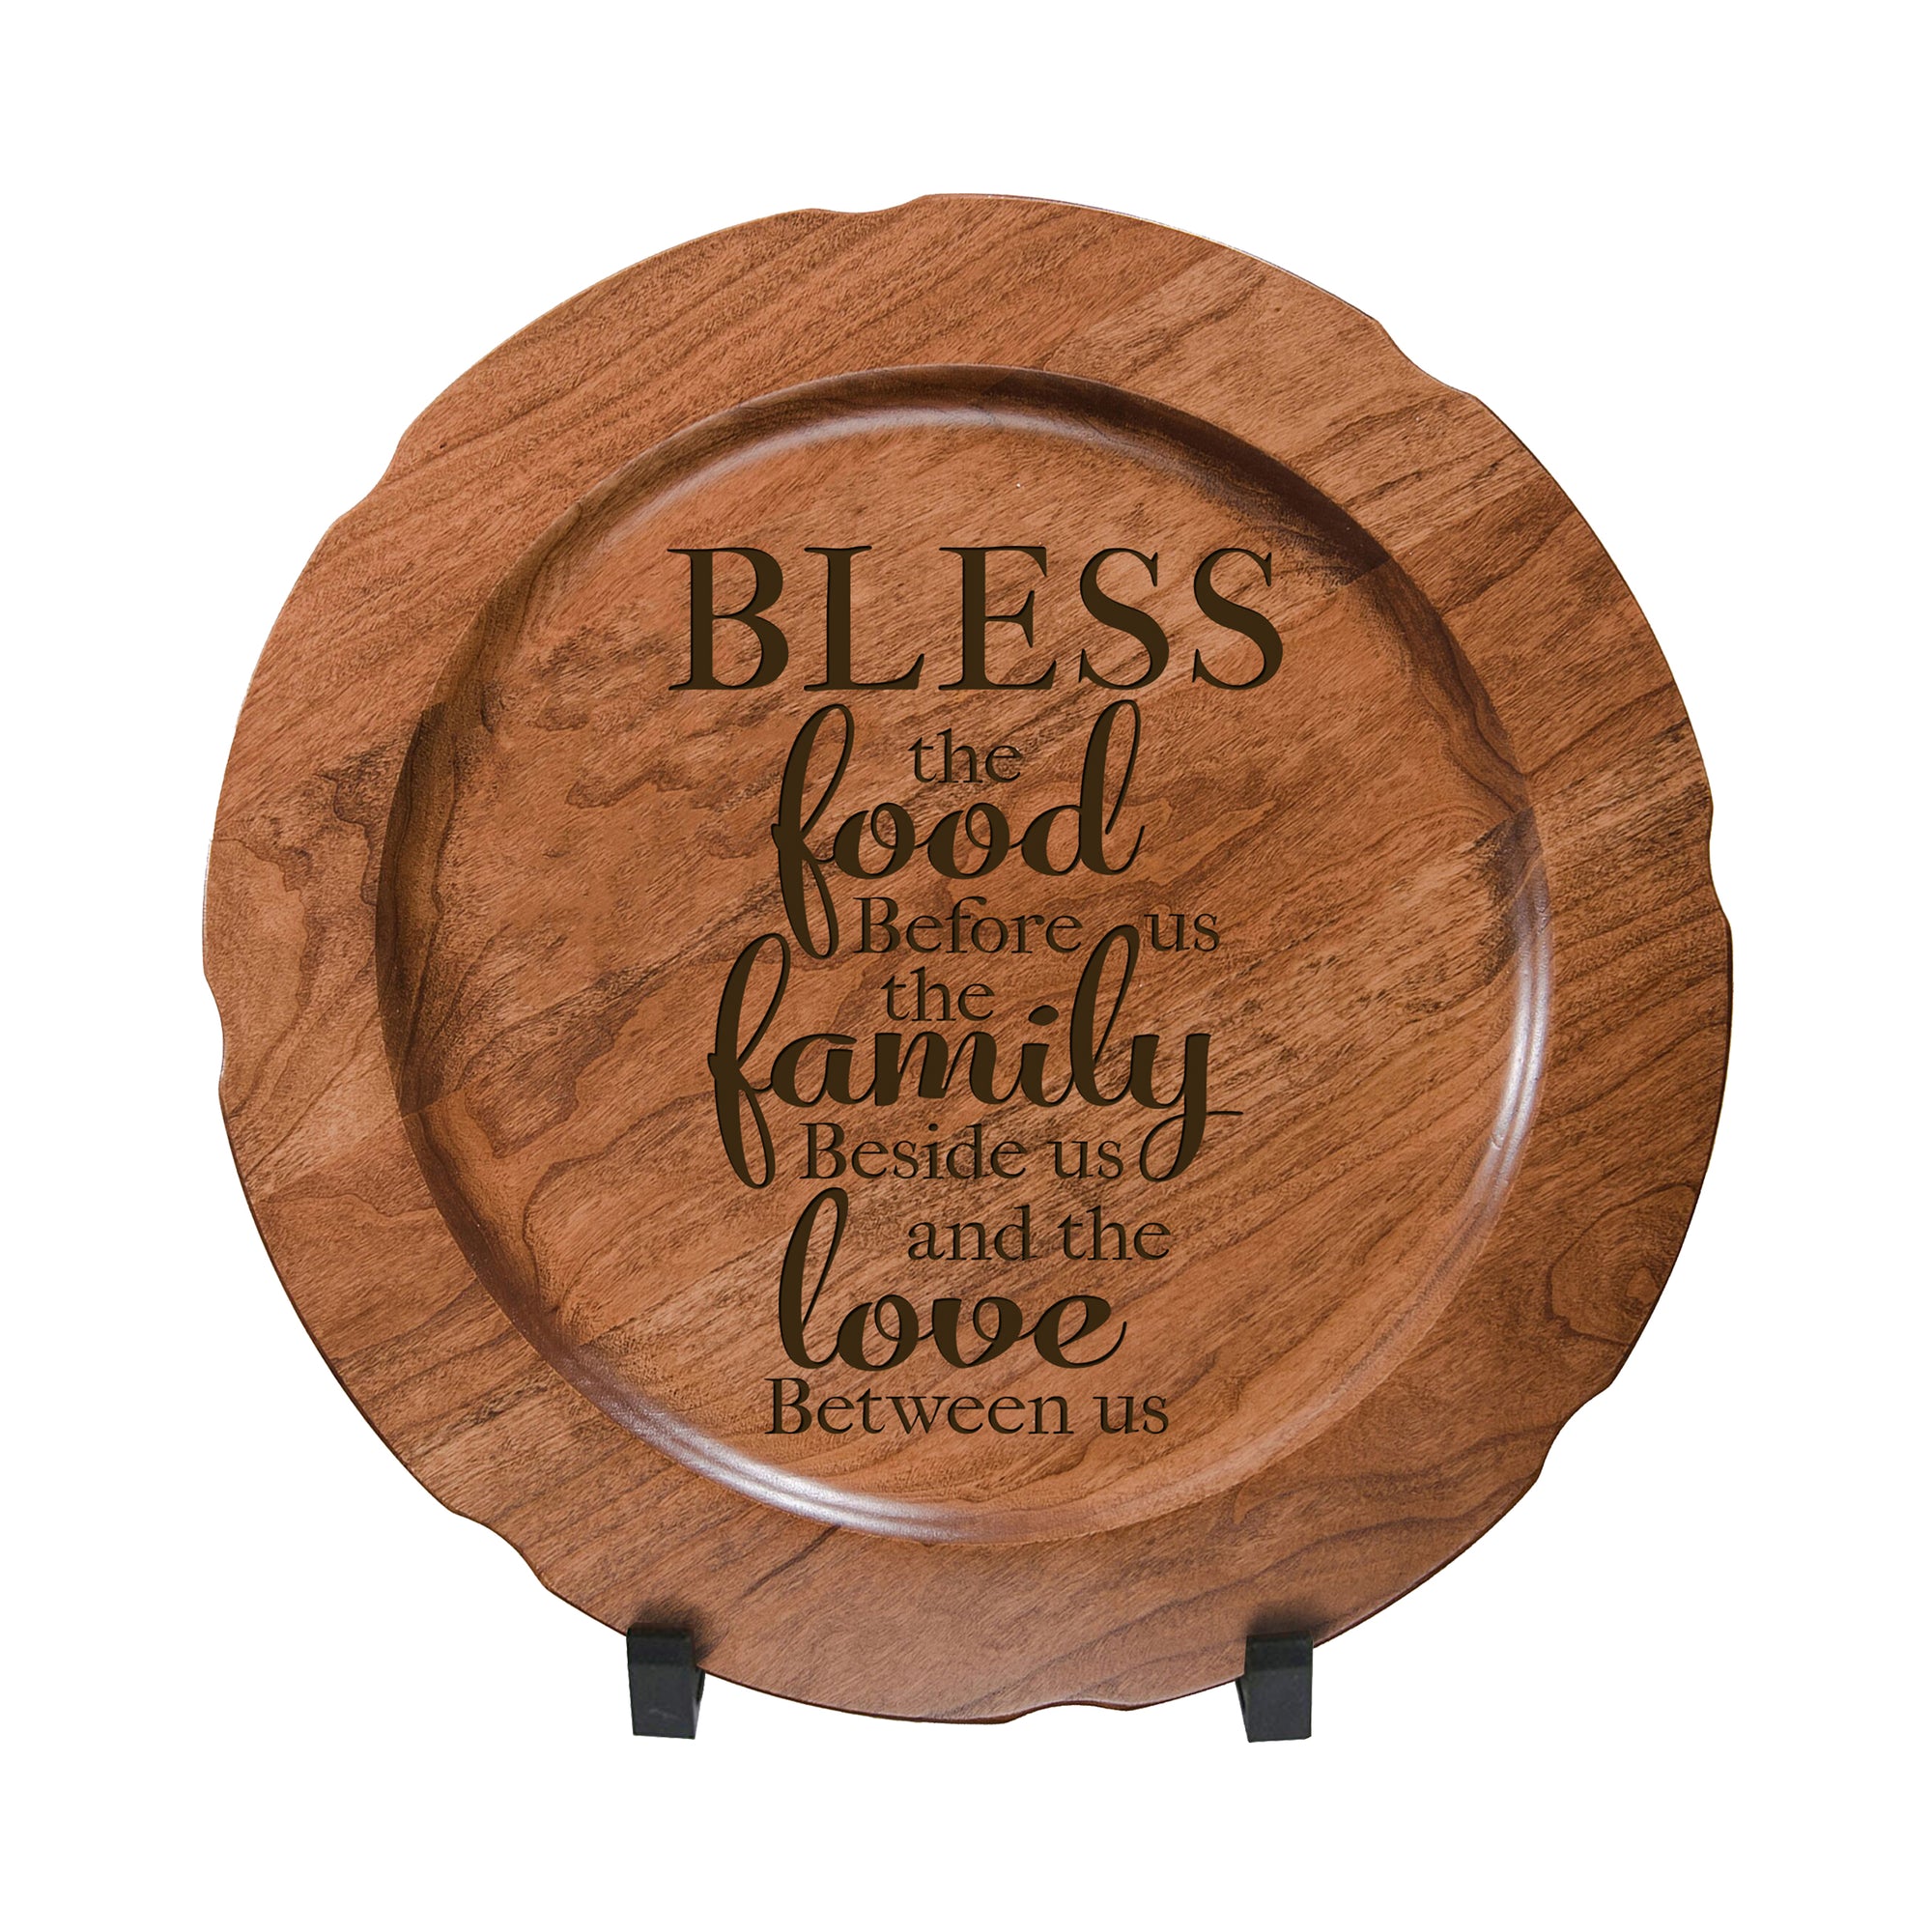 LifeSong Milestones Wooden Decorative Plate Family Keepsake 12in Bless The Food Housewarming Mother’s Day Gift Home Wall Decor Kitchen Keepsake